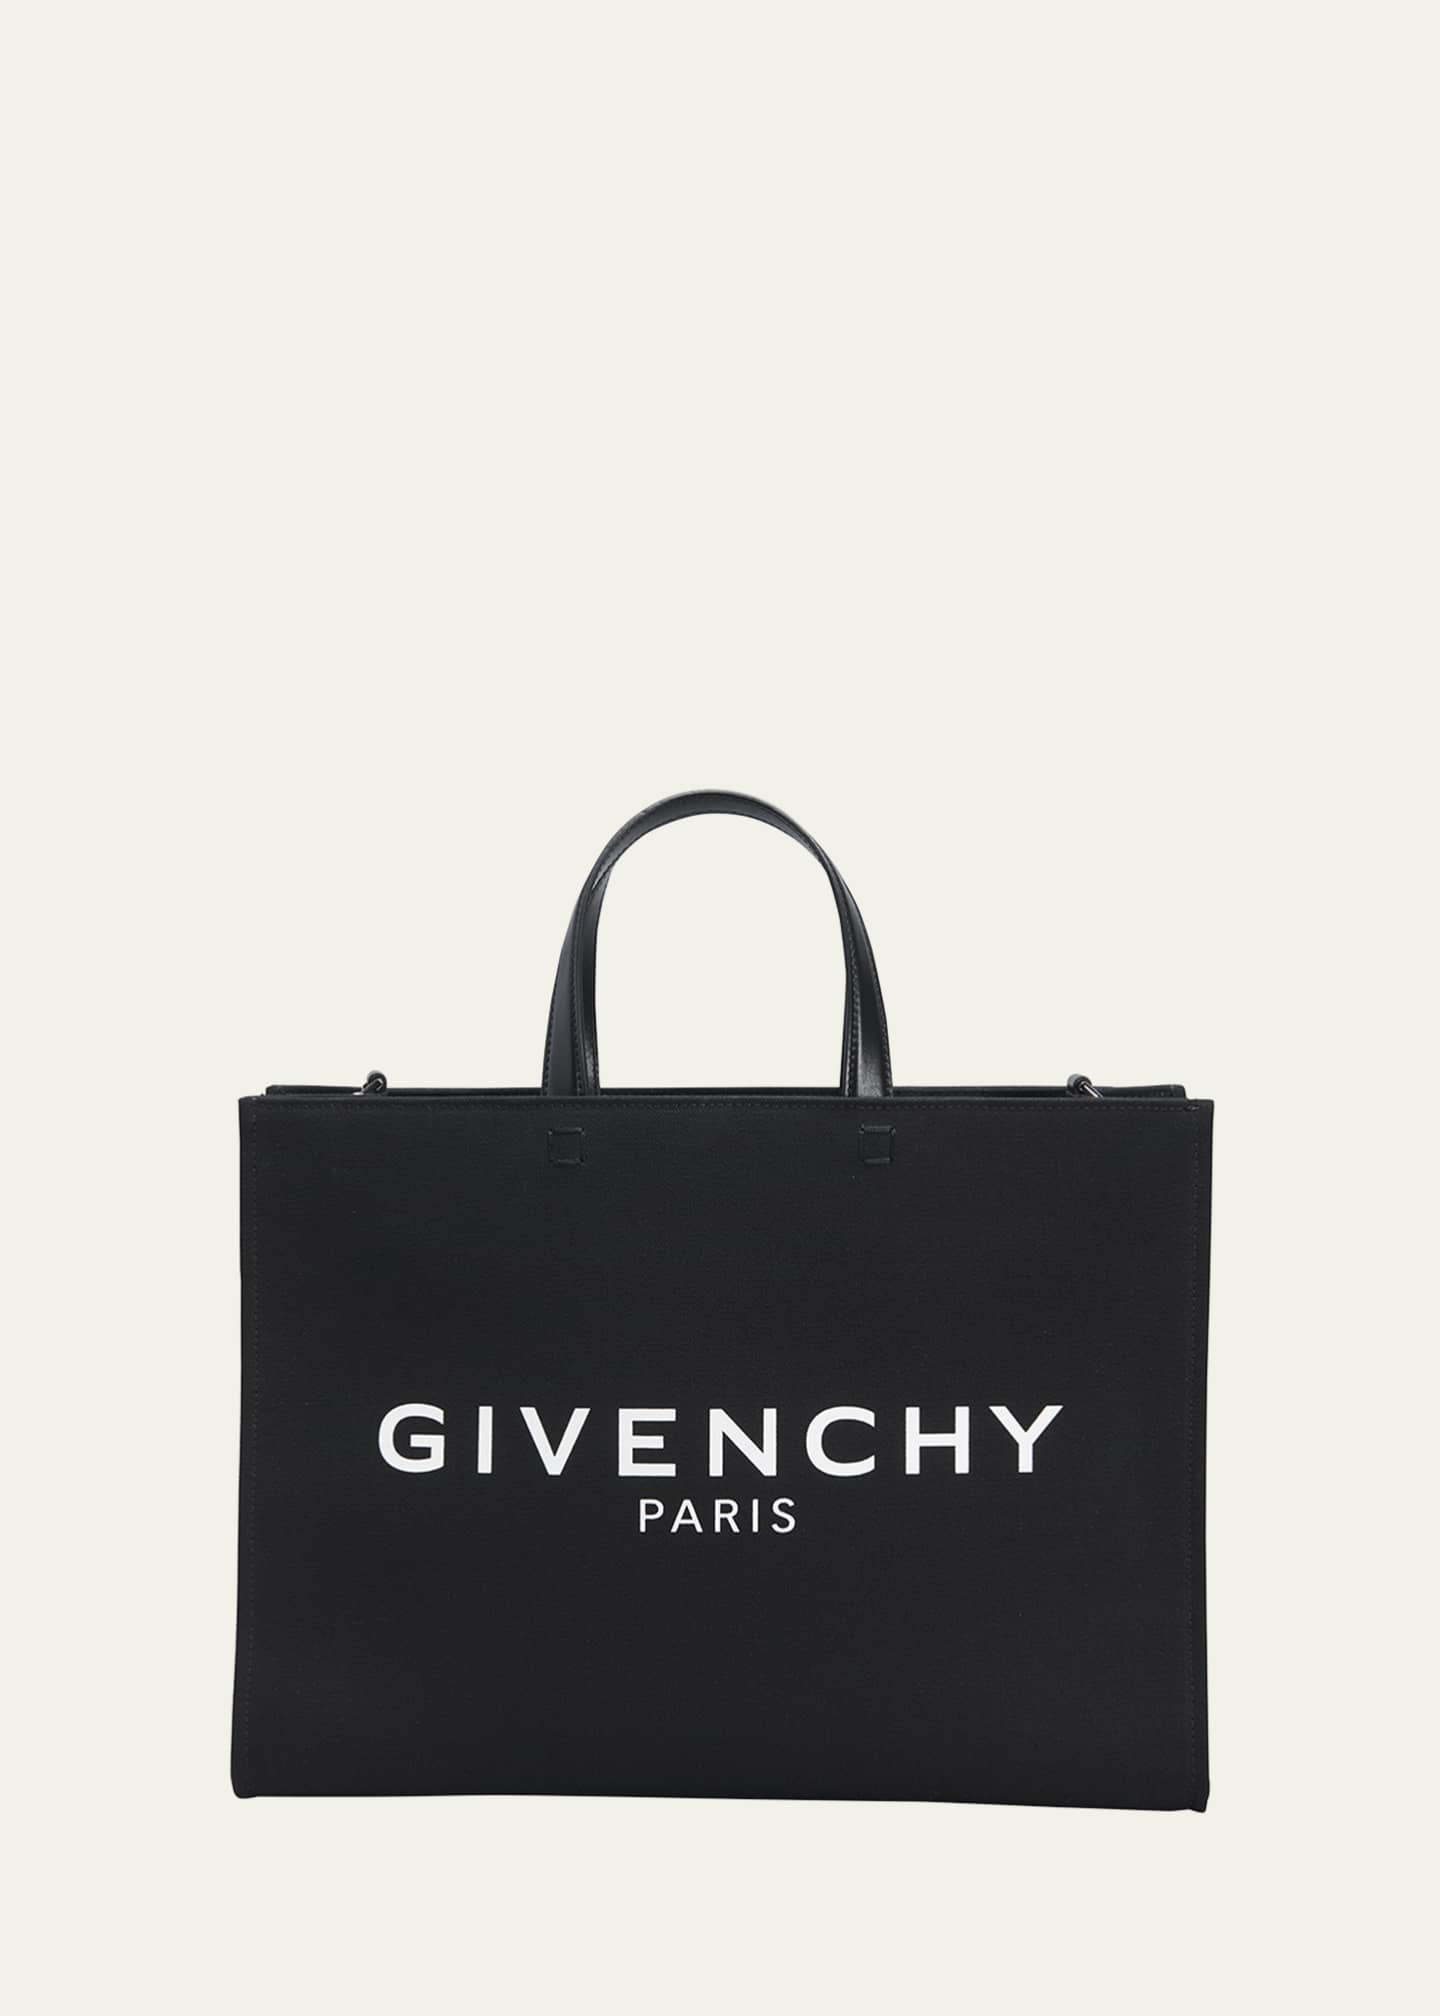 Women's G Canvas Tote Bag by Givenchy